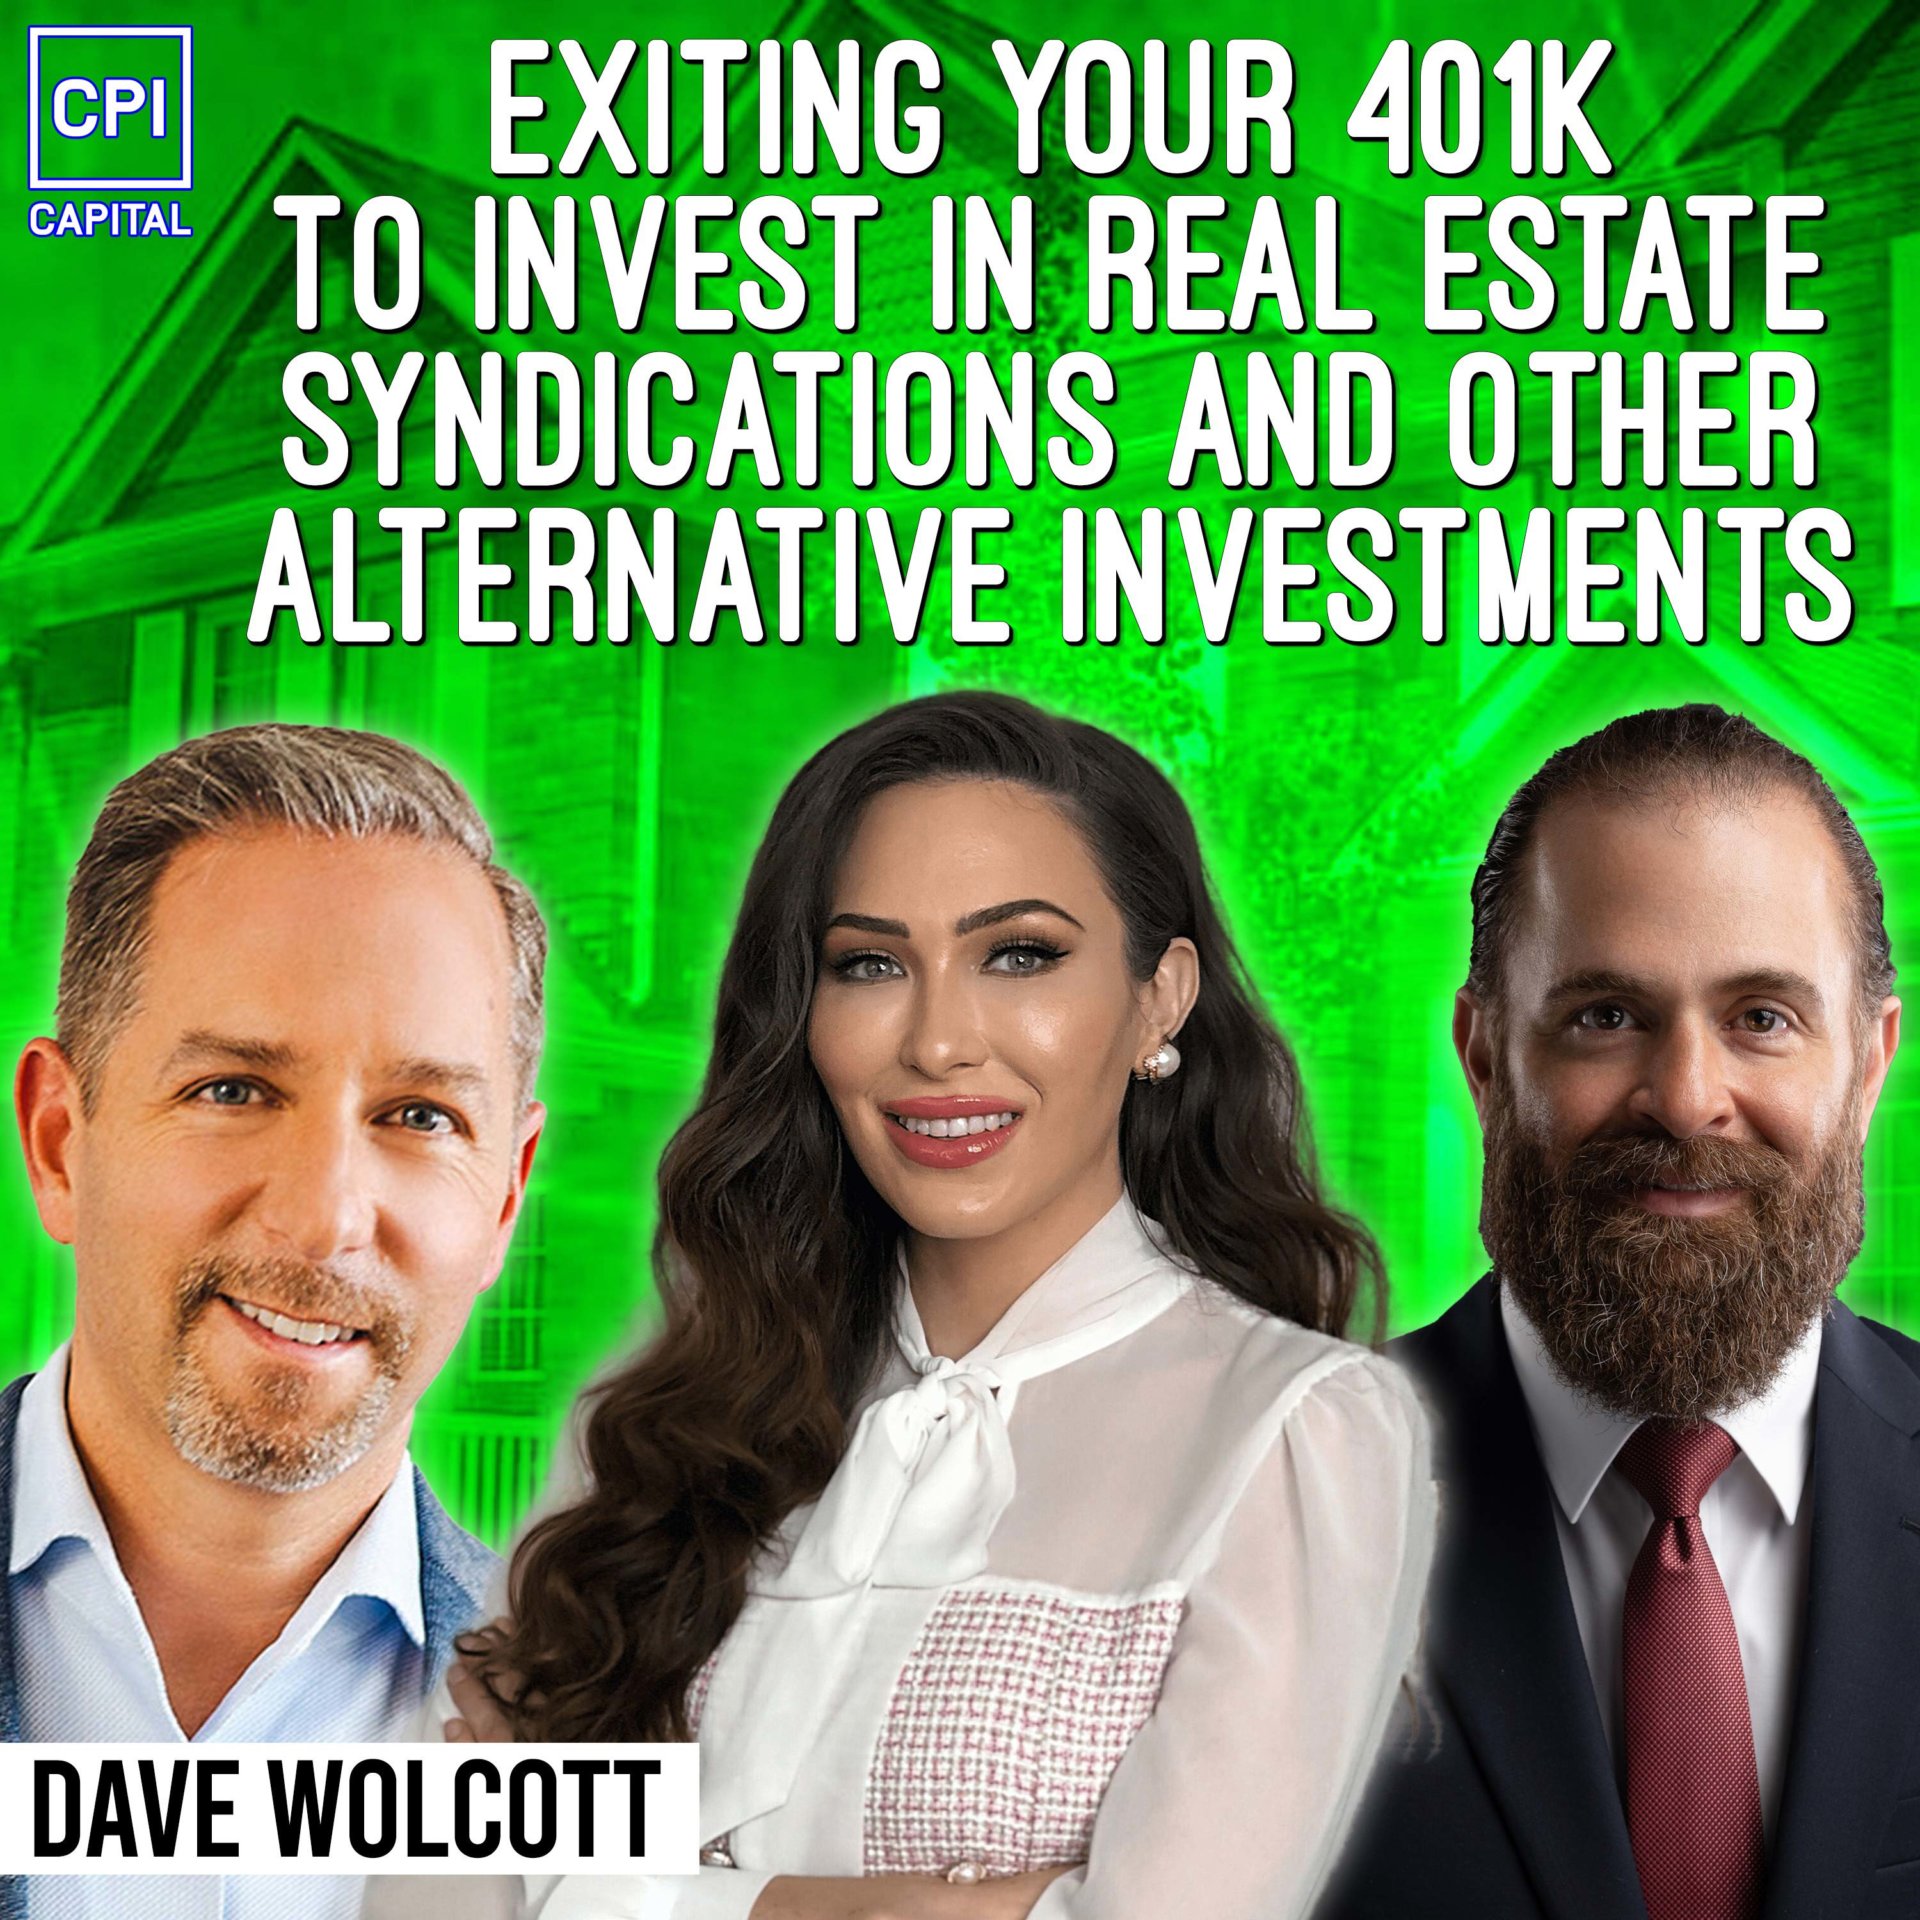 Exiting Your 401k To Invest In Real Estate Syndications And Other Alternative Investments – Dave Wolcott